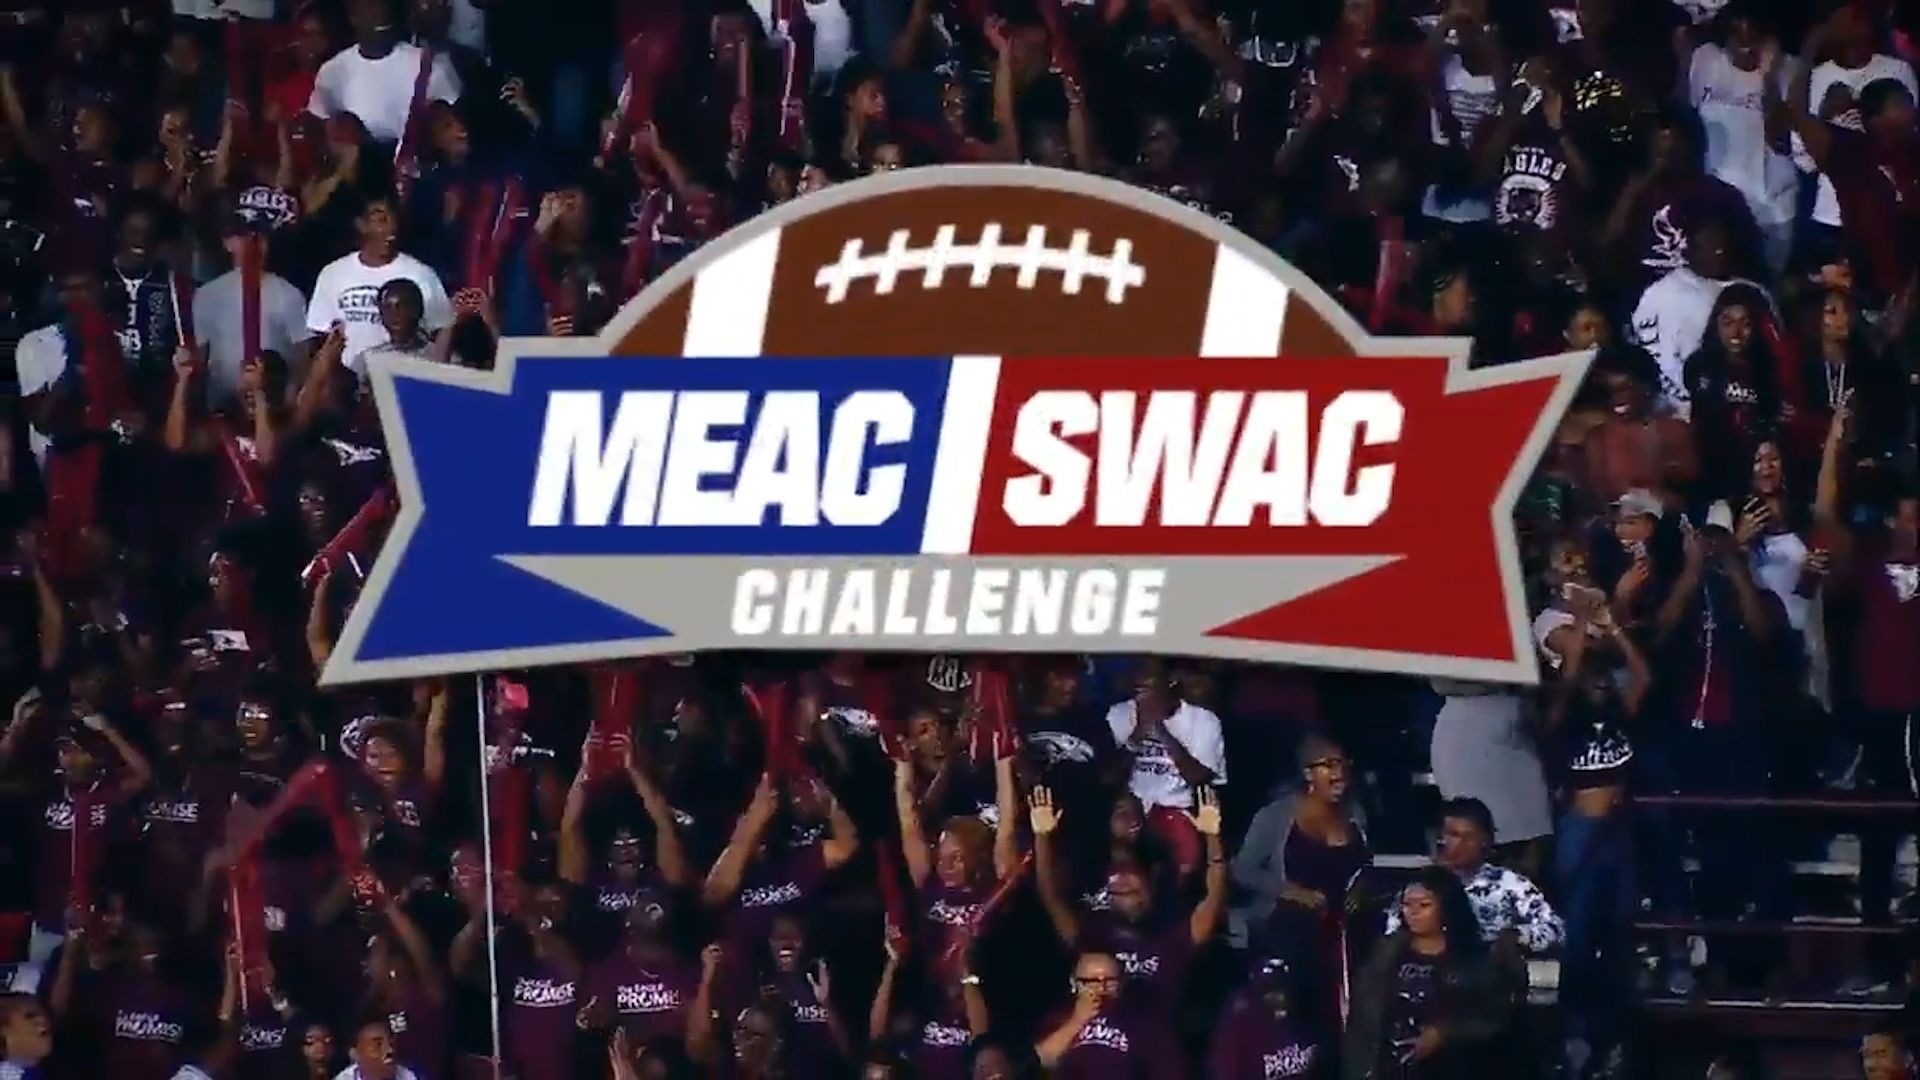 MEAC/SWAC Challenge, now in its 14th year, will be played in its new